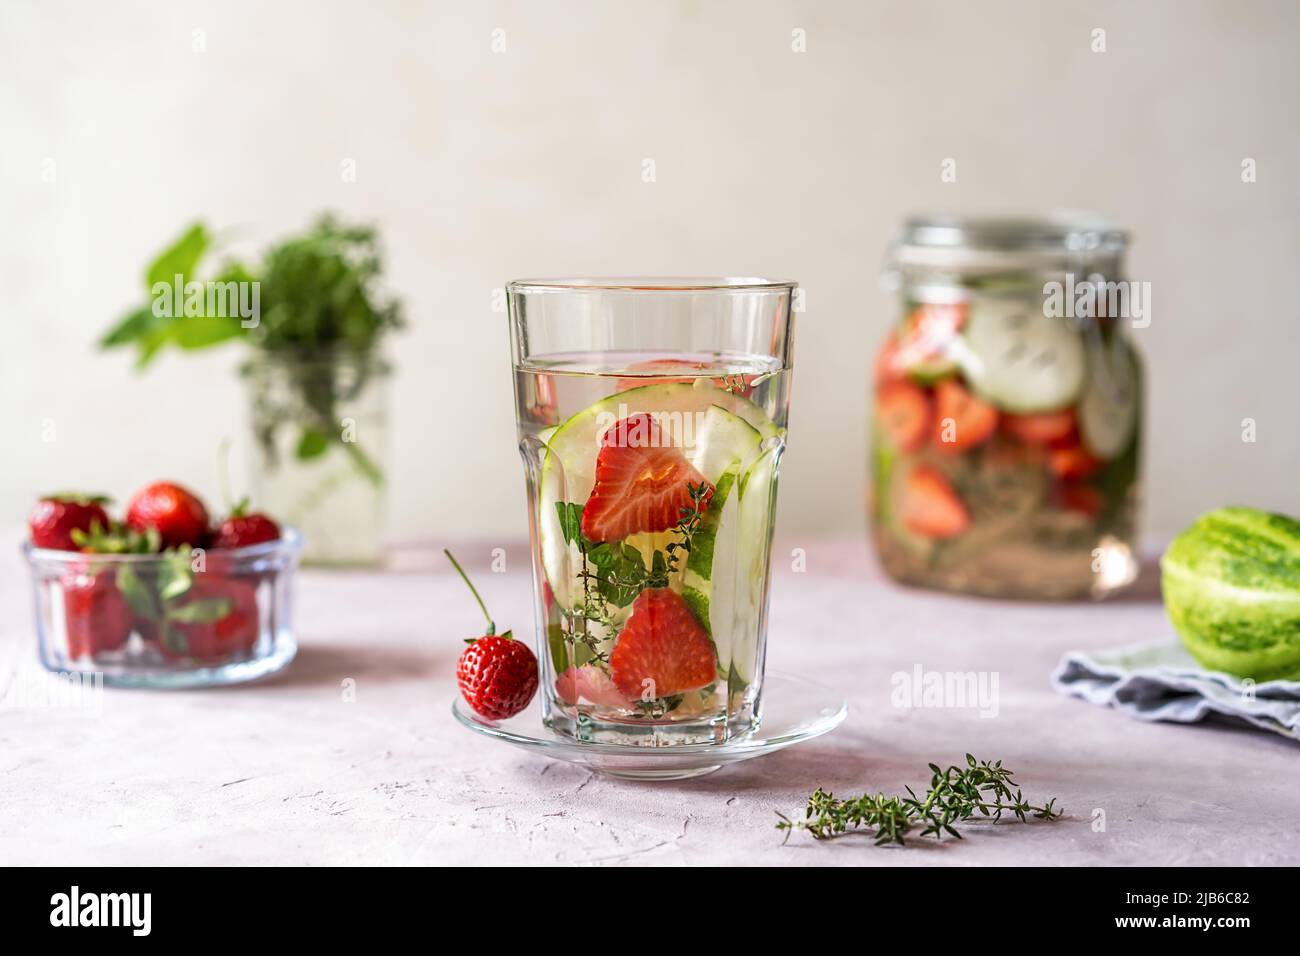 Infused water with strawberry and meloncella that is hybrid of cucumber and melon, thyme, mint.  Stock Photo